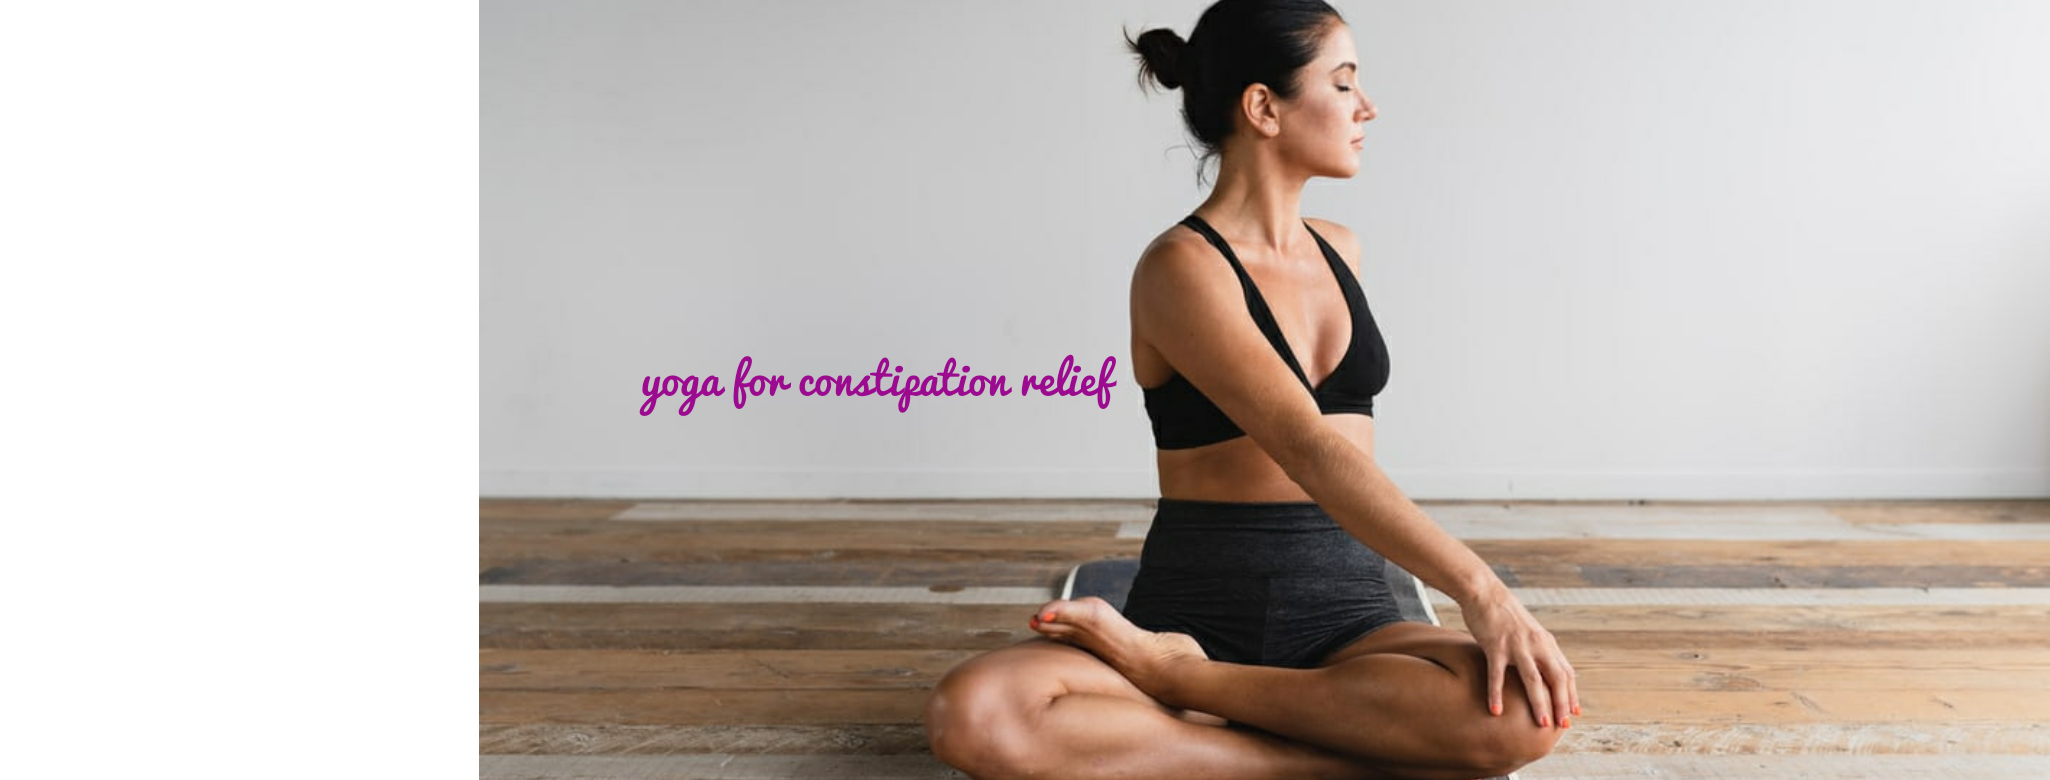 7 Best Yoga Poses for Bloating | Sunny Health and Fitness